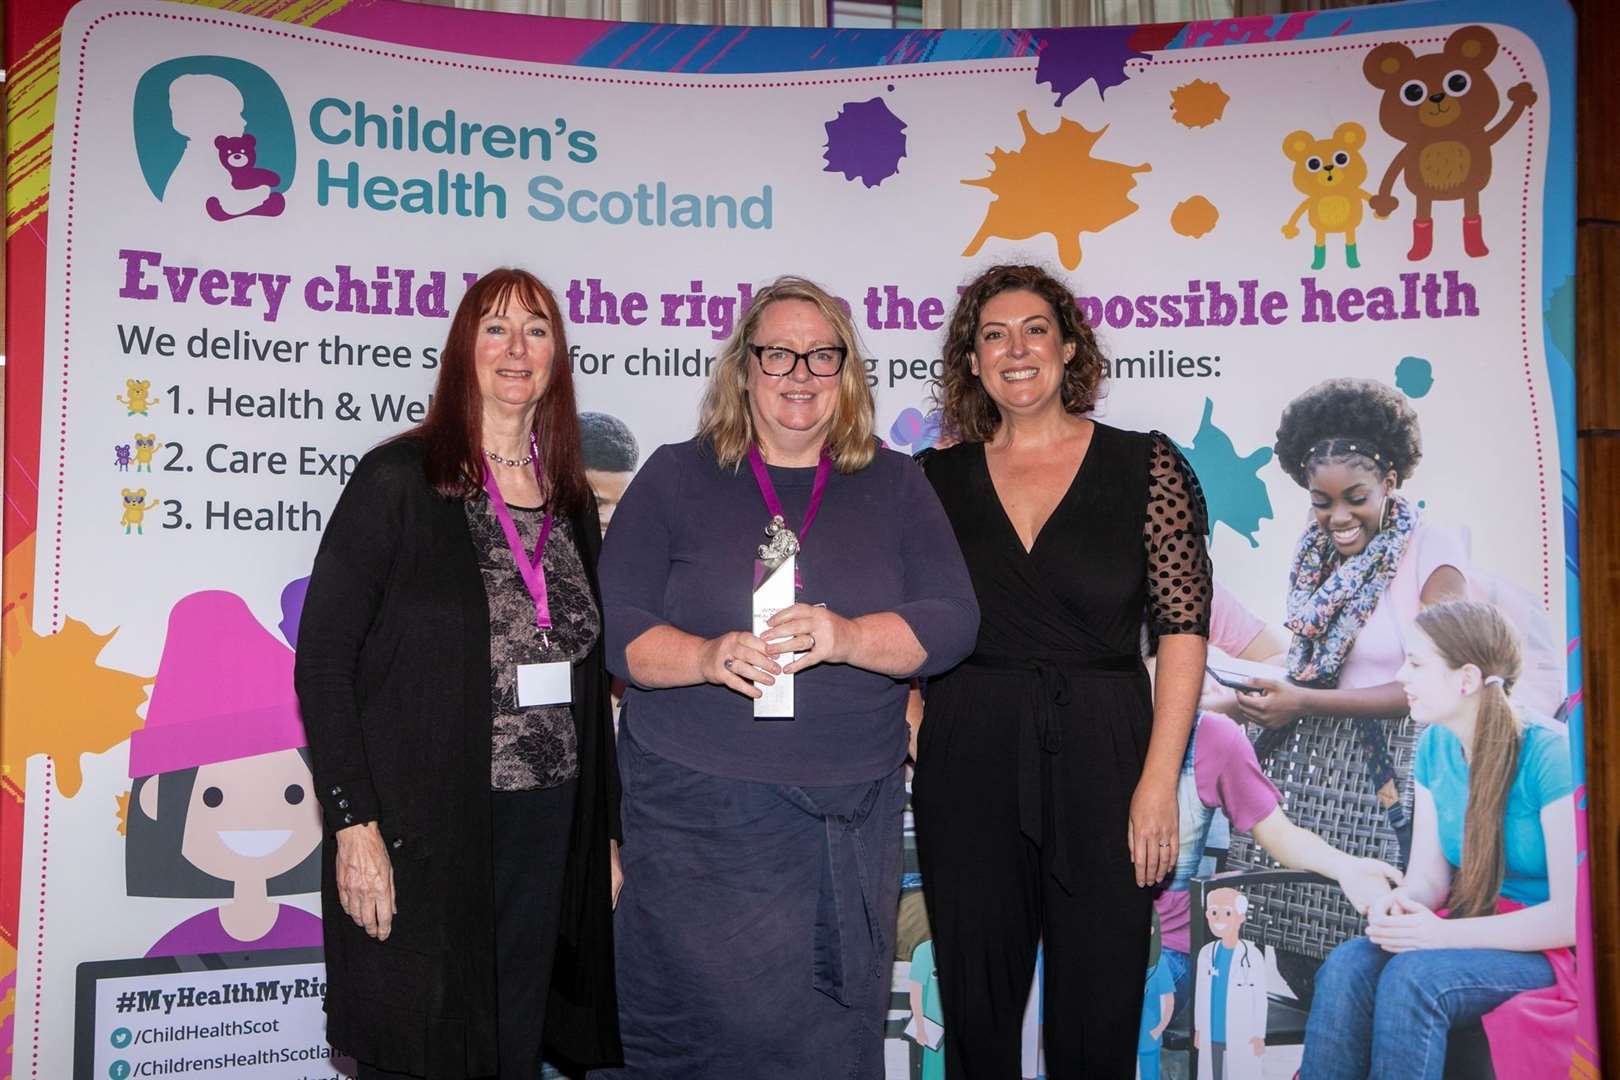 Laura Stewart is presented with her award by vice-chairwoman for Children’s Health Scotland Gwen Garner (left) and Scottish journalist and broadcaster Catriona Shearer who hosted the awards.